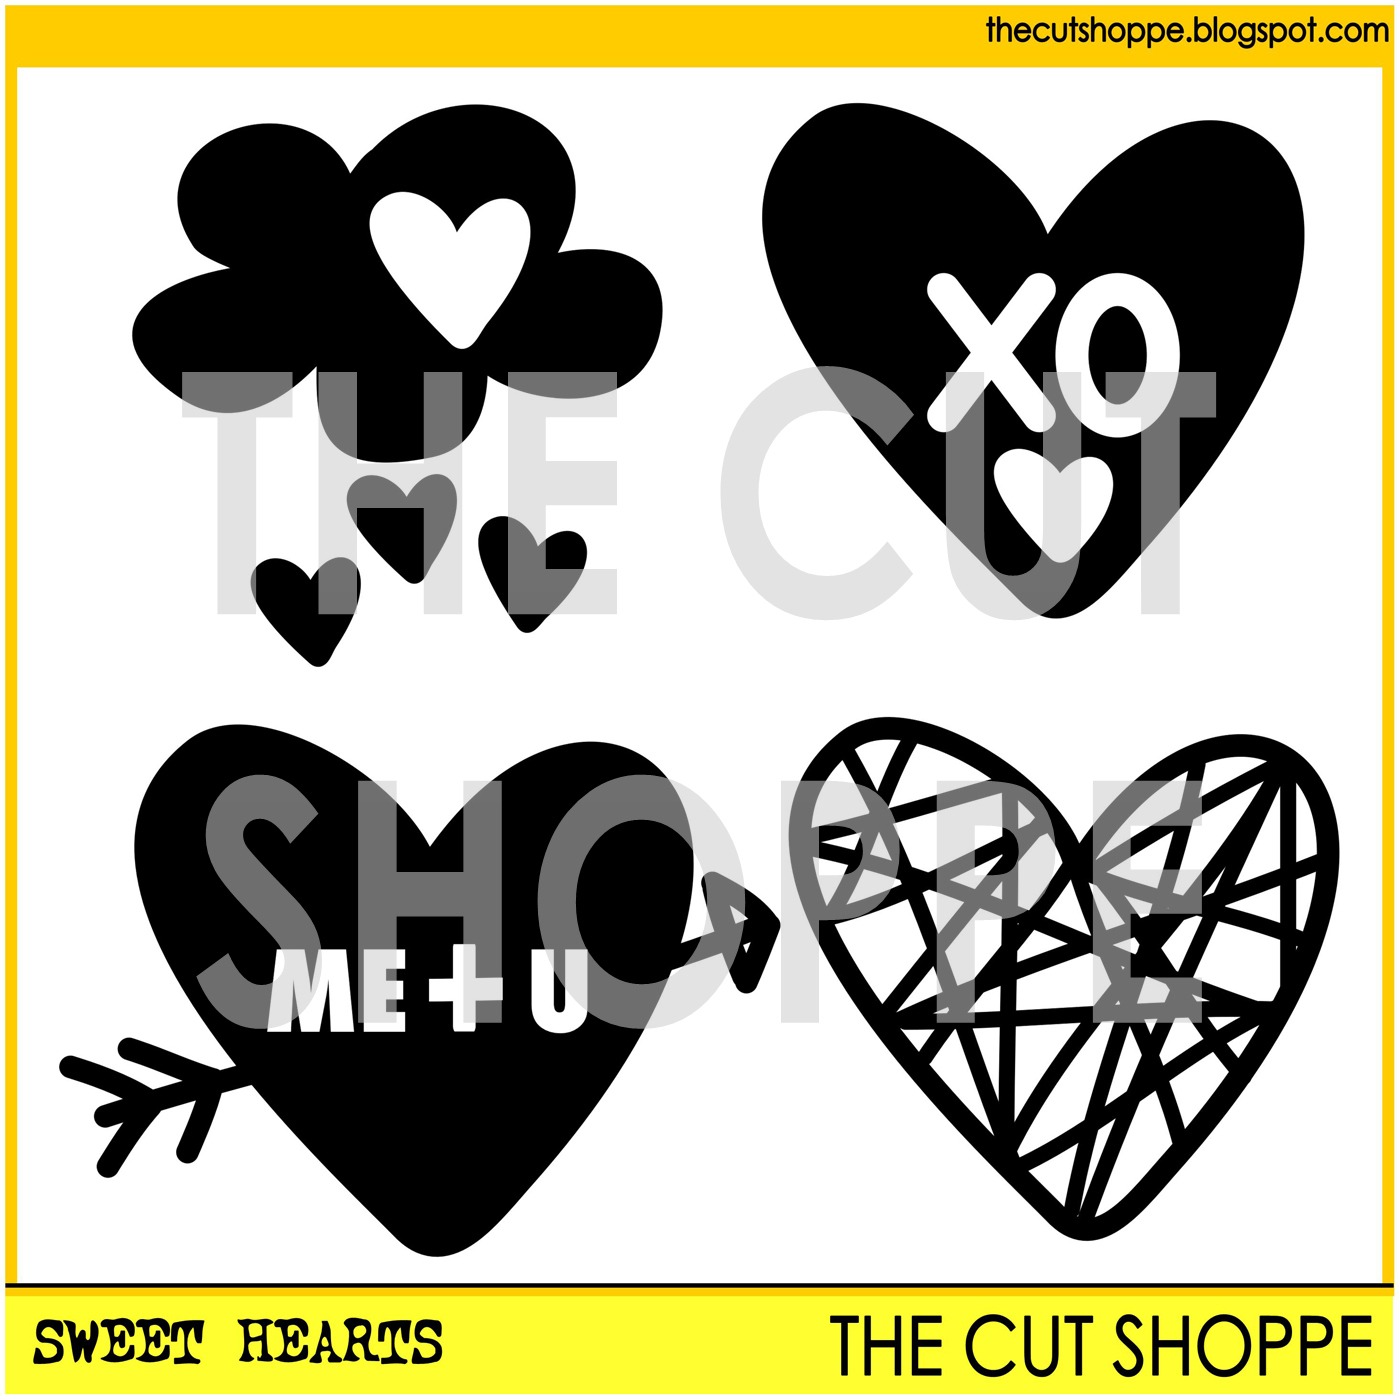 https://www.etsy.com/listing/220418531/the-sweet-hearts-cut-file-includes-4?ref=shop_home_active_1